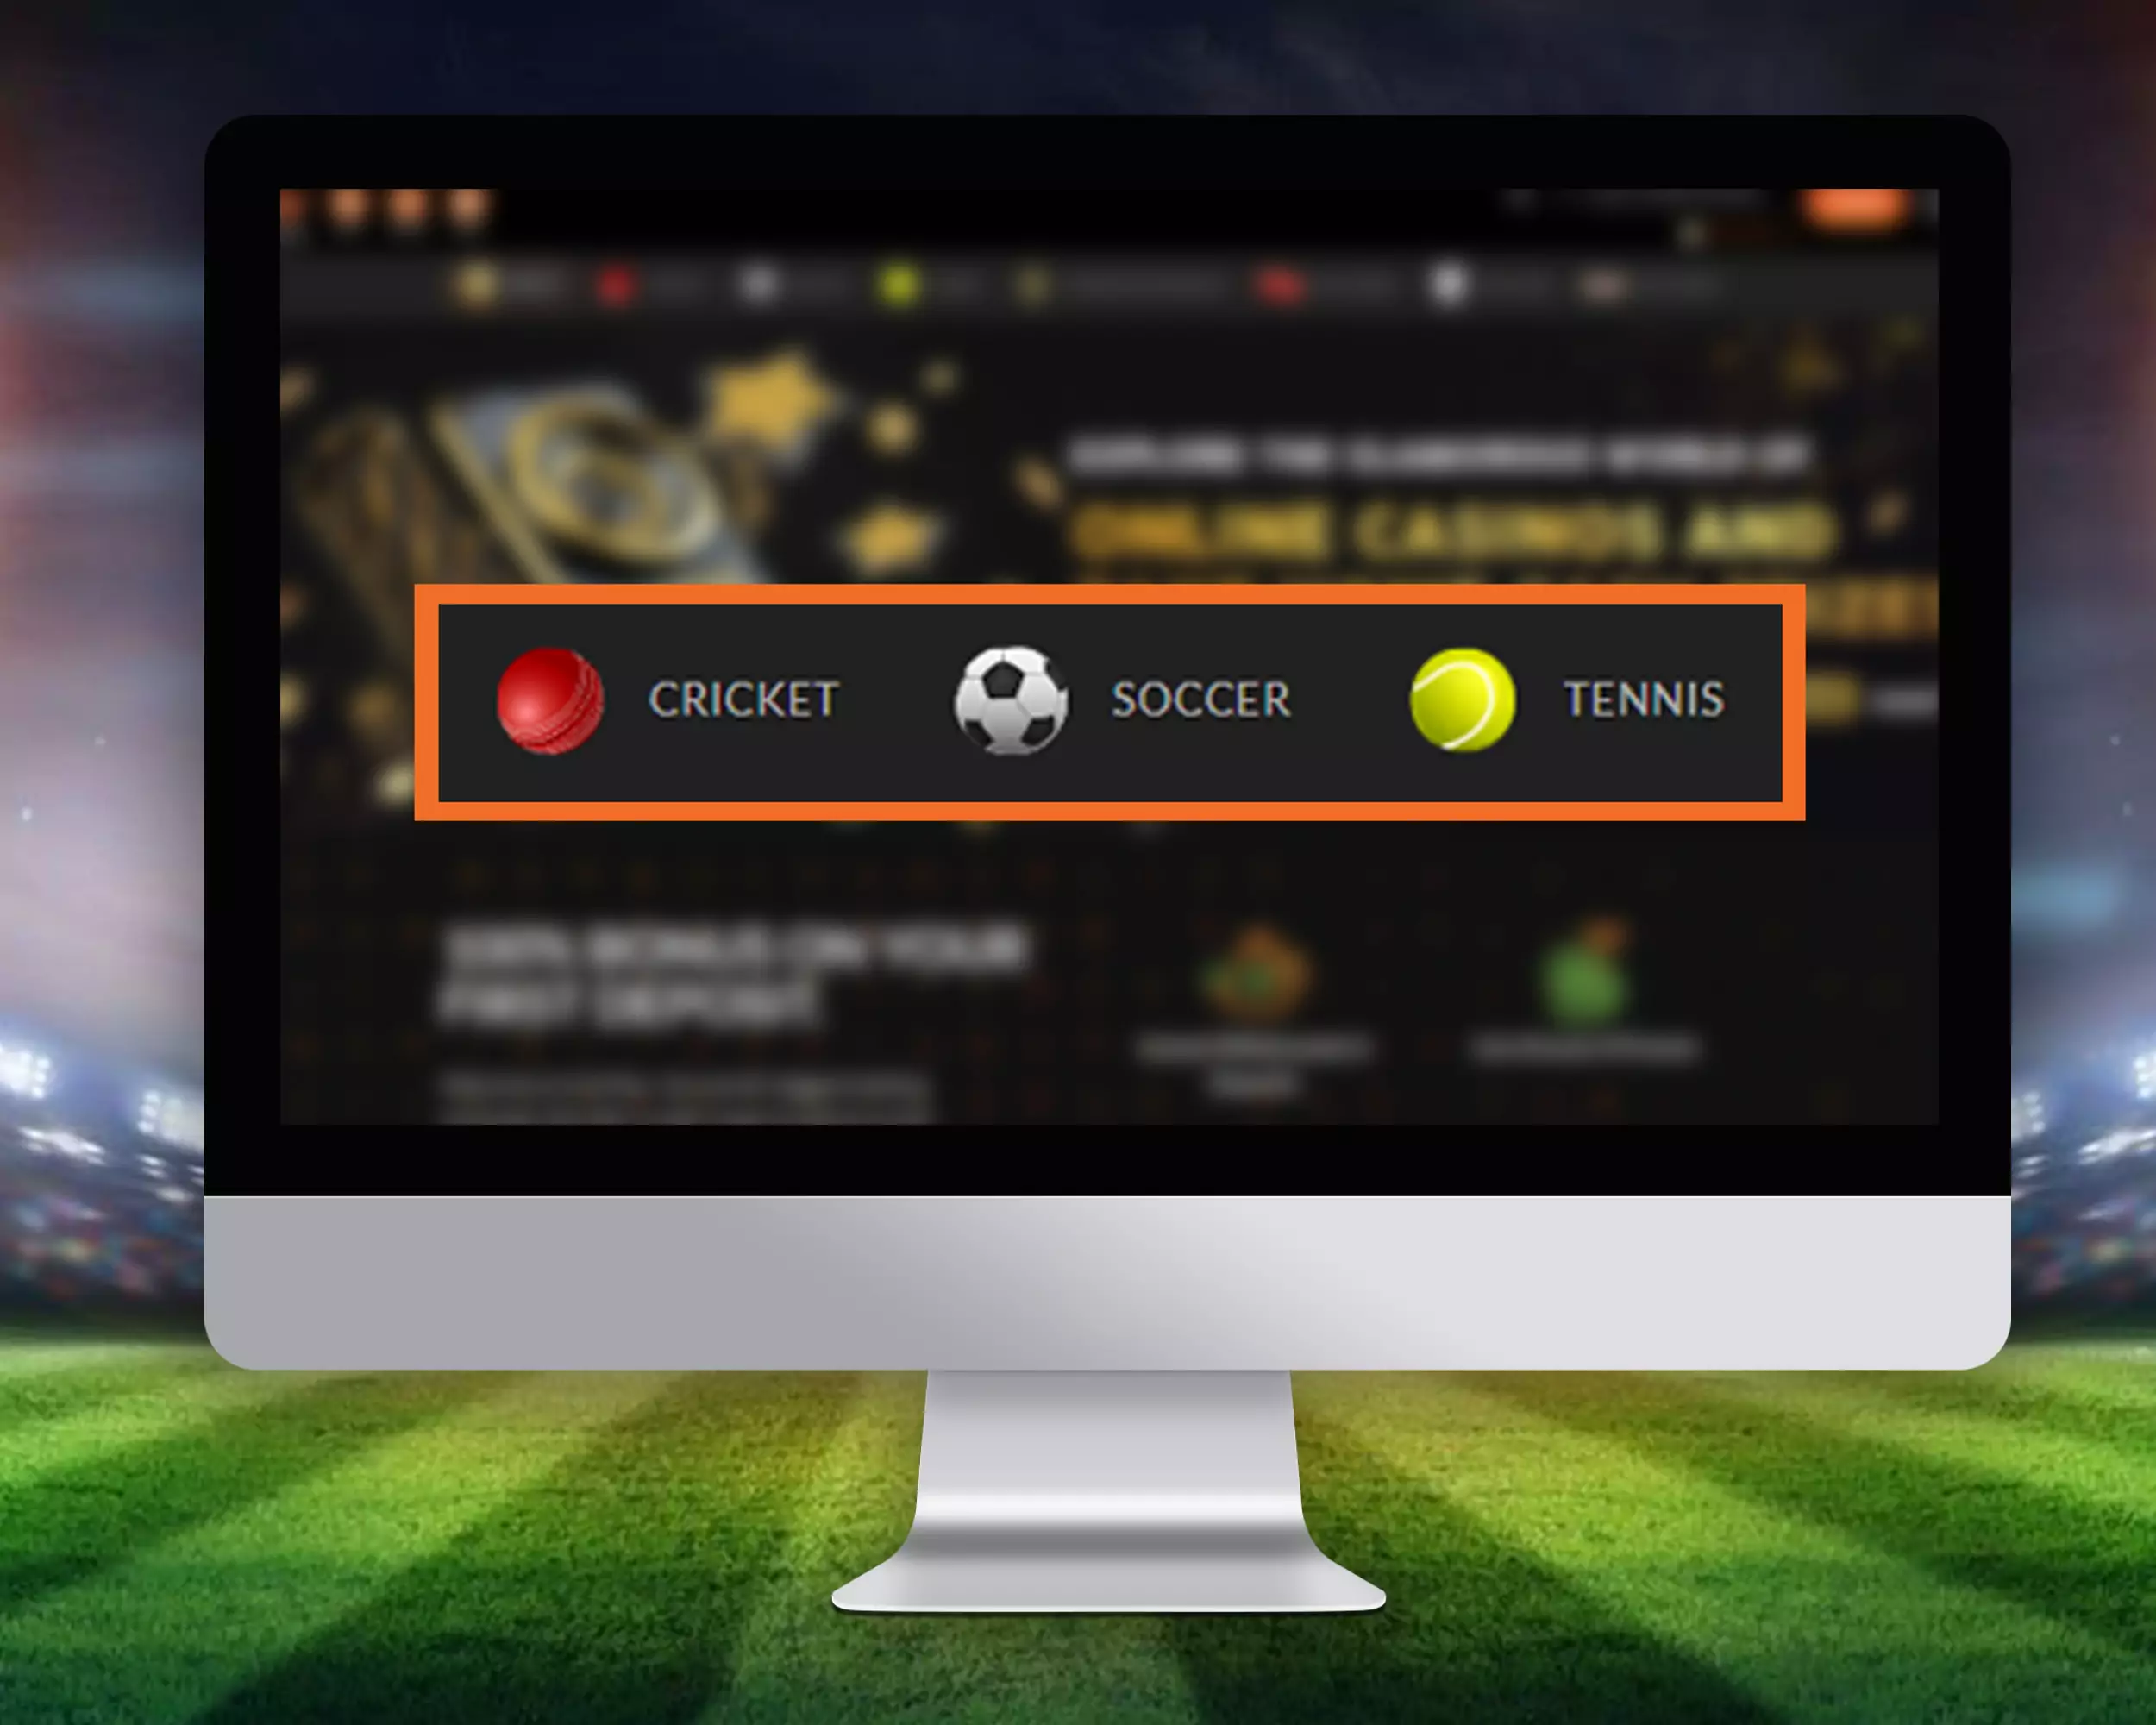 Fairplay offers a user-friendly interface and settings for sports betting.